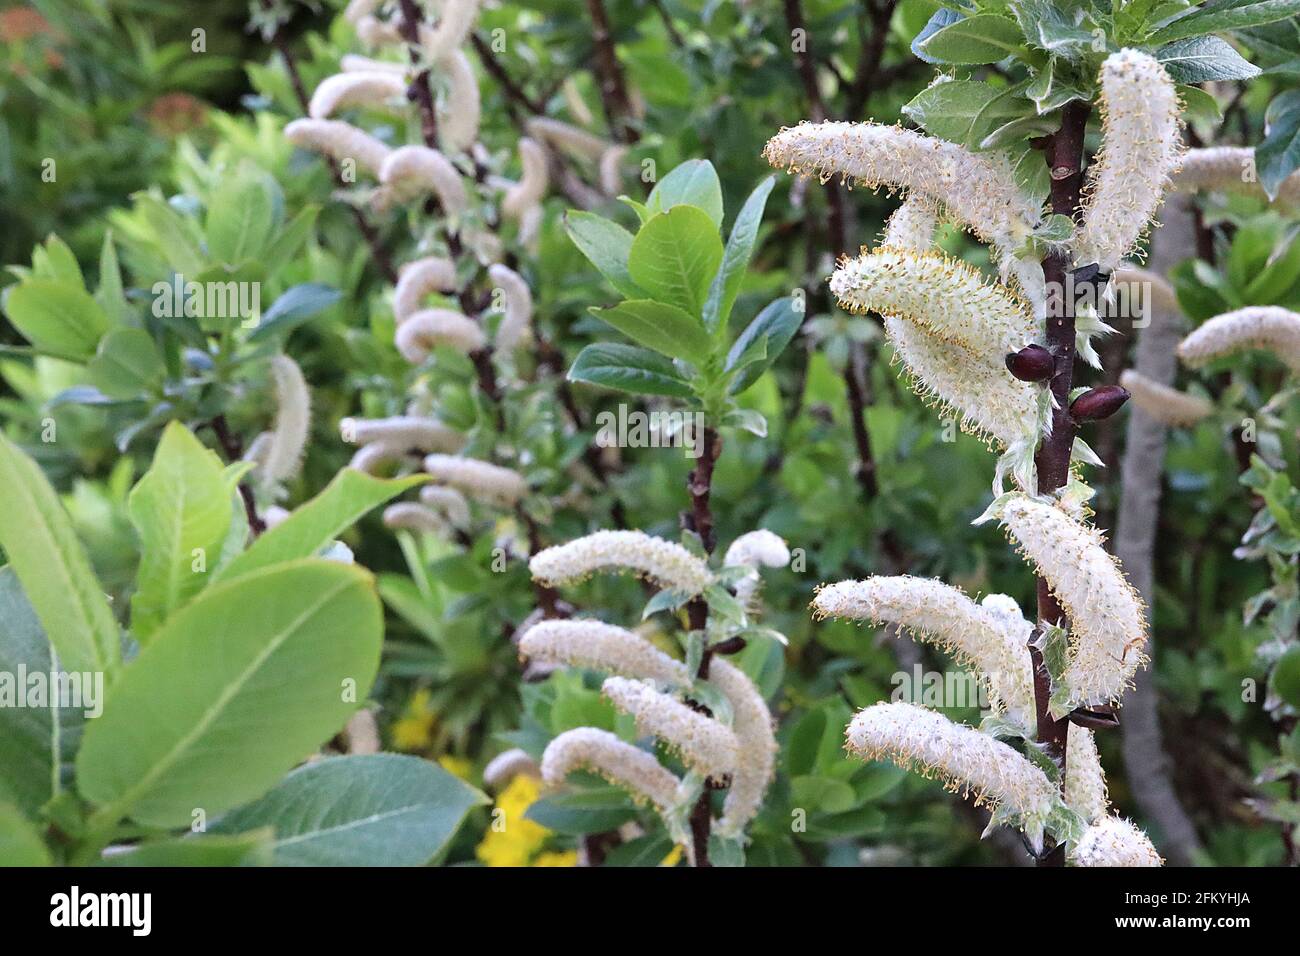 Salix hastata Halberd willow – cylindrical and horizontal white catkins with yellow pollen,  May, England, UK Stock Photo